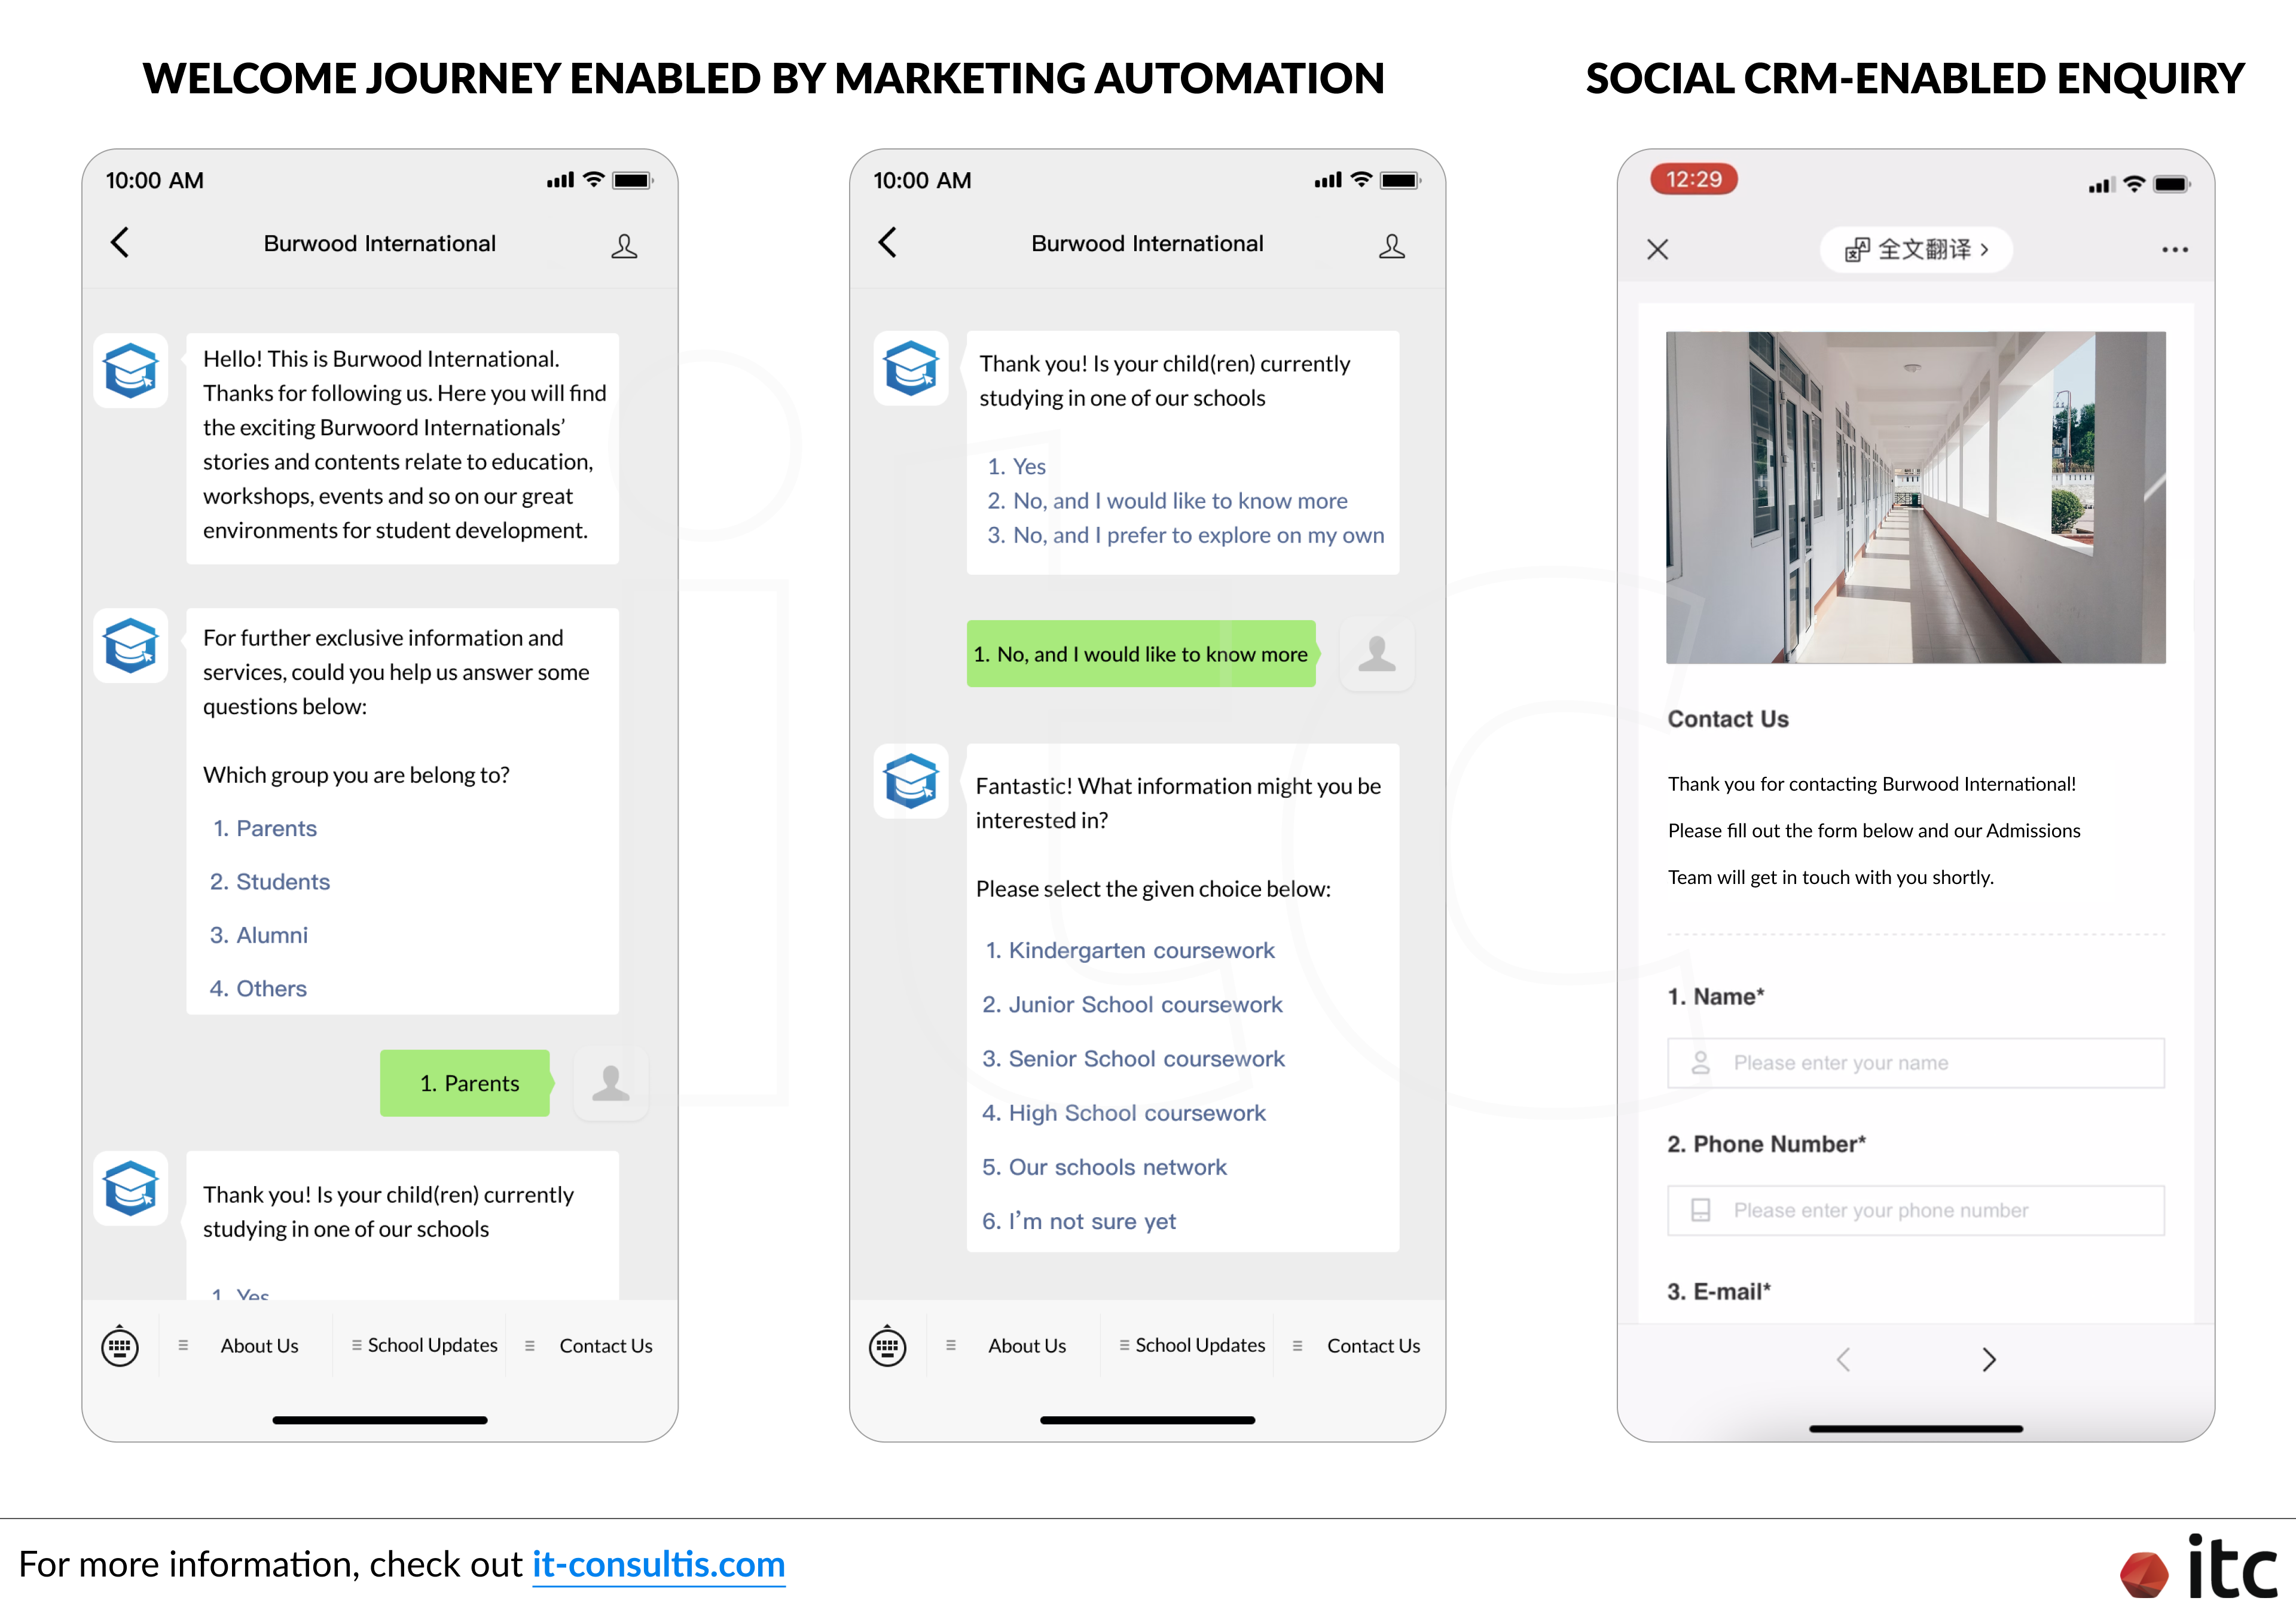 IT Consultis helped an International School Group in China set up a personalized user journey to effectively target different segments of customers by syncing up the brand's WeChat Official Account with the Social CRM system